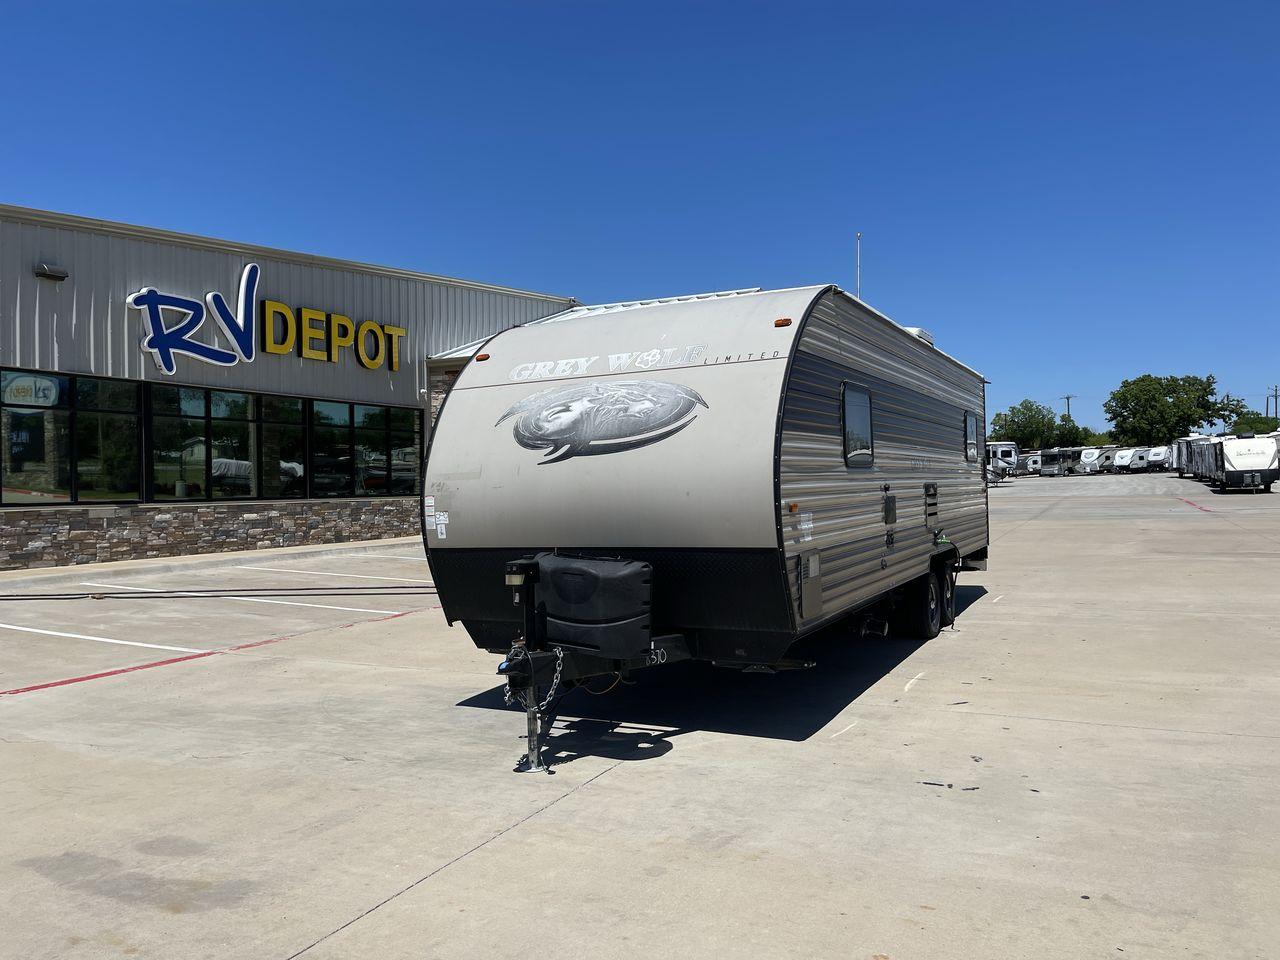 2018 FOREST RIVER GREY WOLF 22RR (4X4TCKX2XJK) , Length: 28.83 ft. ft | Dry Weight: 4,871 lbs | Gross Weight: 7,686 lbs.| Slides: 0 transmission, located at 4319 N Main St, Cleburne, TX, 76033, (817) 678-5133, 32.385960, -97.391212 - Introducing the 2018 Forest River Grey Wolf 22RR, a flexible and well-designed travel trailer ideal for explorers who want both comfort and functionality on the road. With a length of 28.83 feet and a dry weight of 4,871 pounds, this RV maintains a balance between spaciousness and lightweight towing - Photo #0